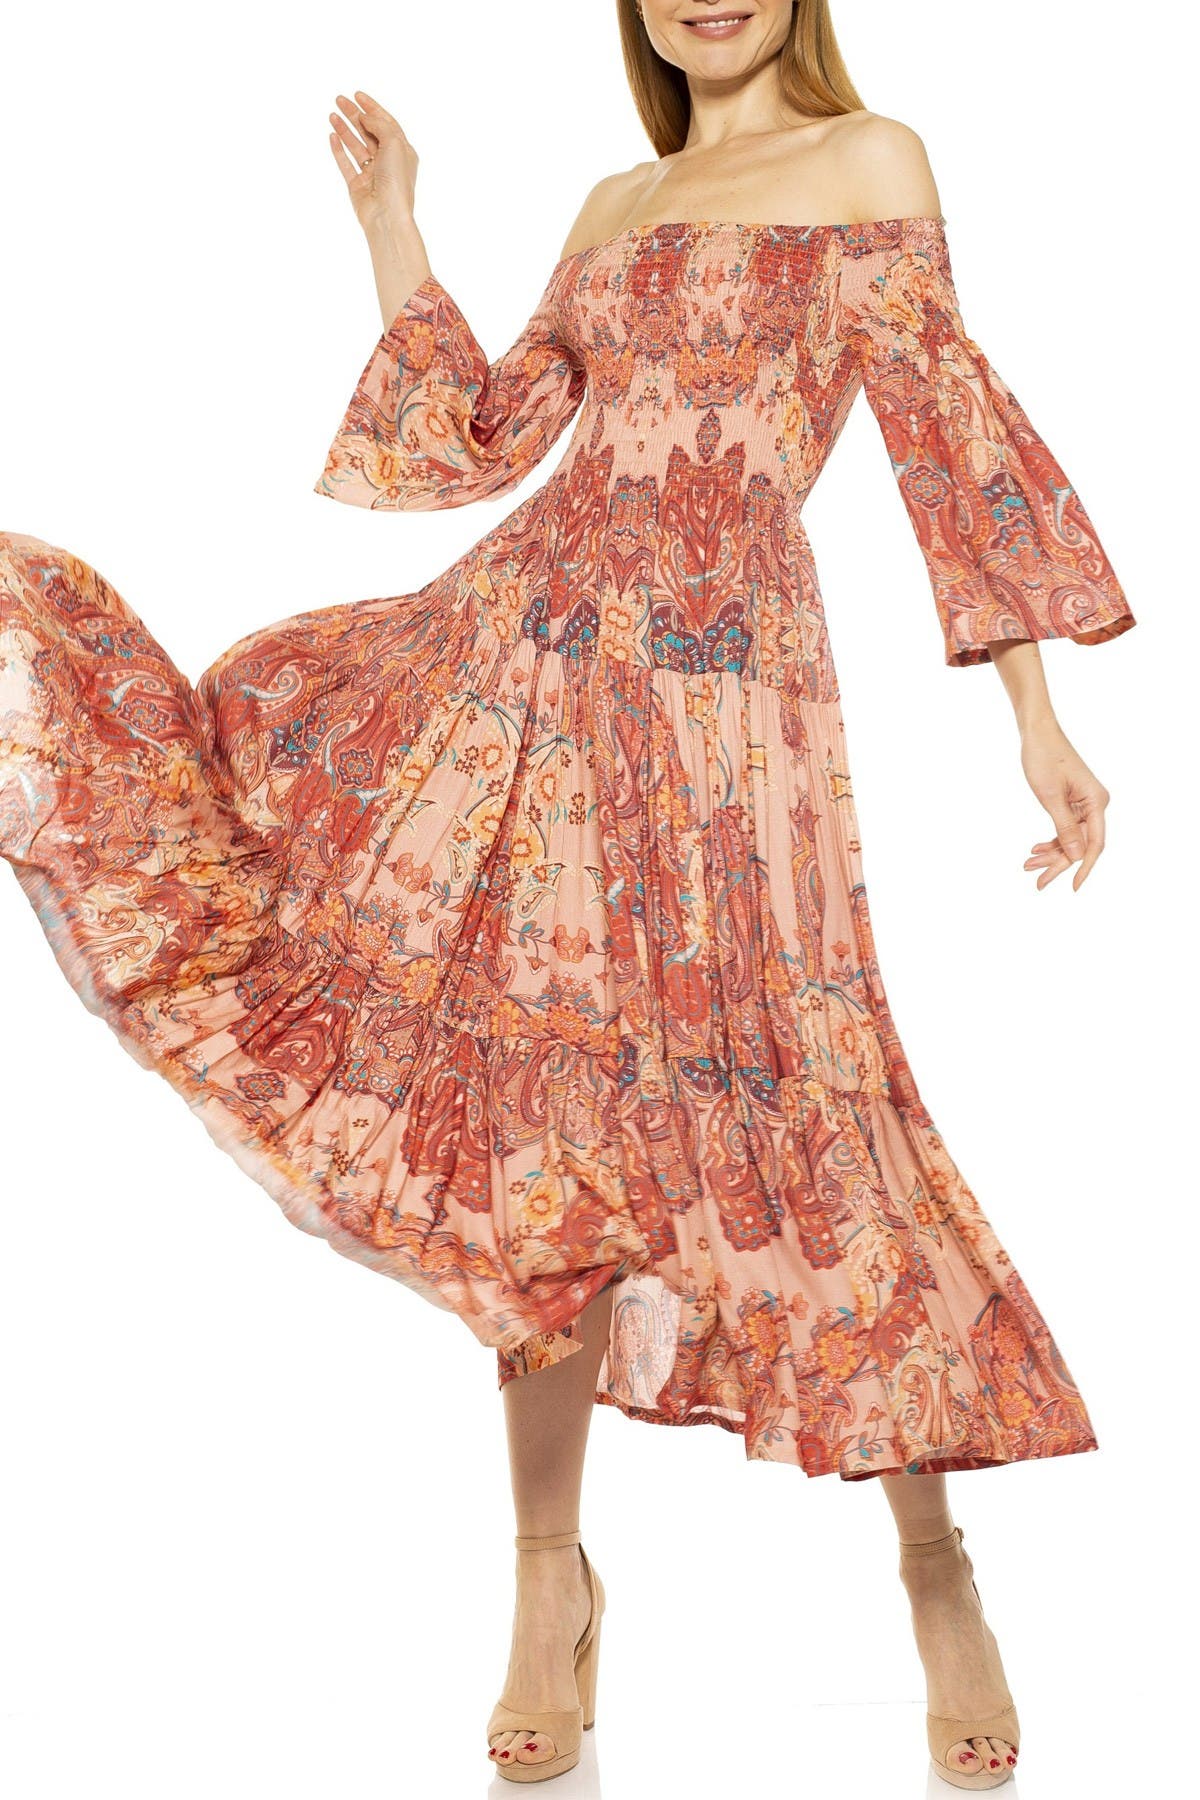 Alexia Admor Amabella Smocked Off-the-shoulder Maxi Dress In Rust Paisley